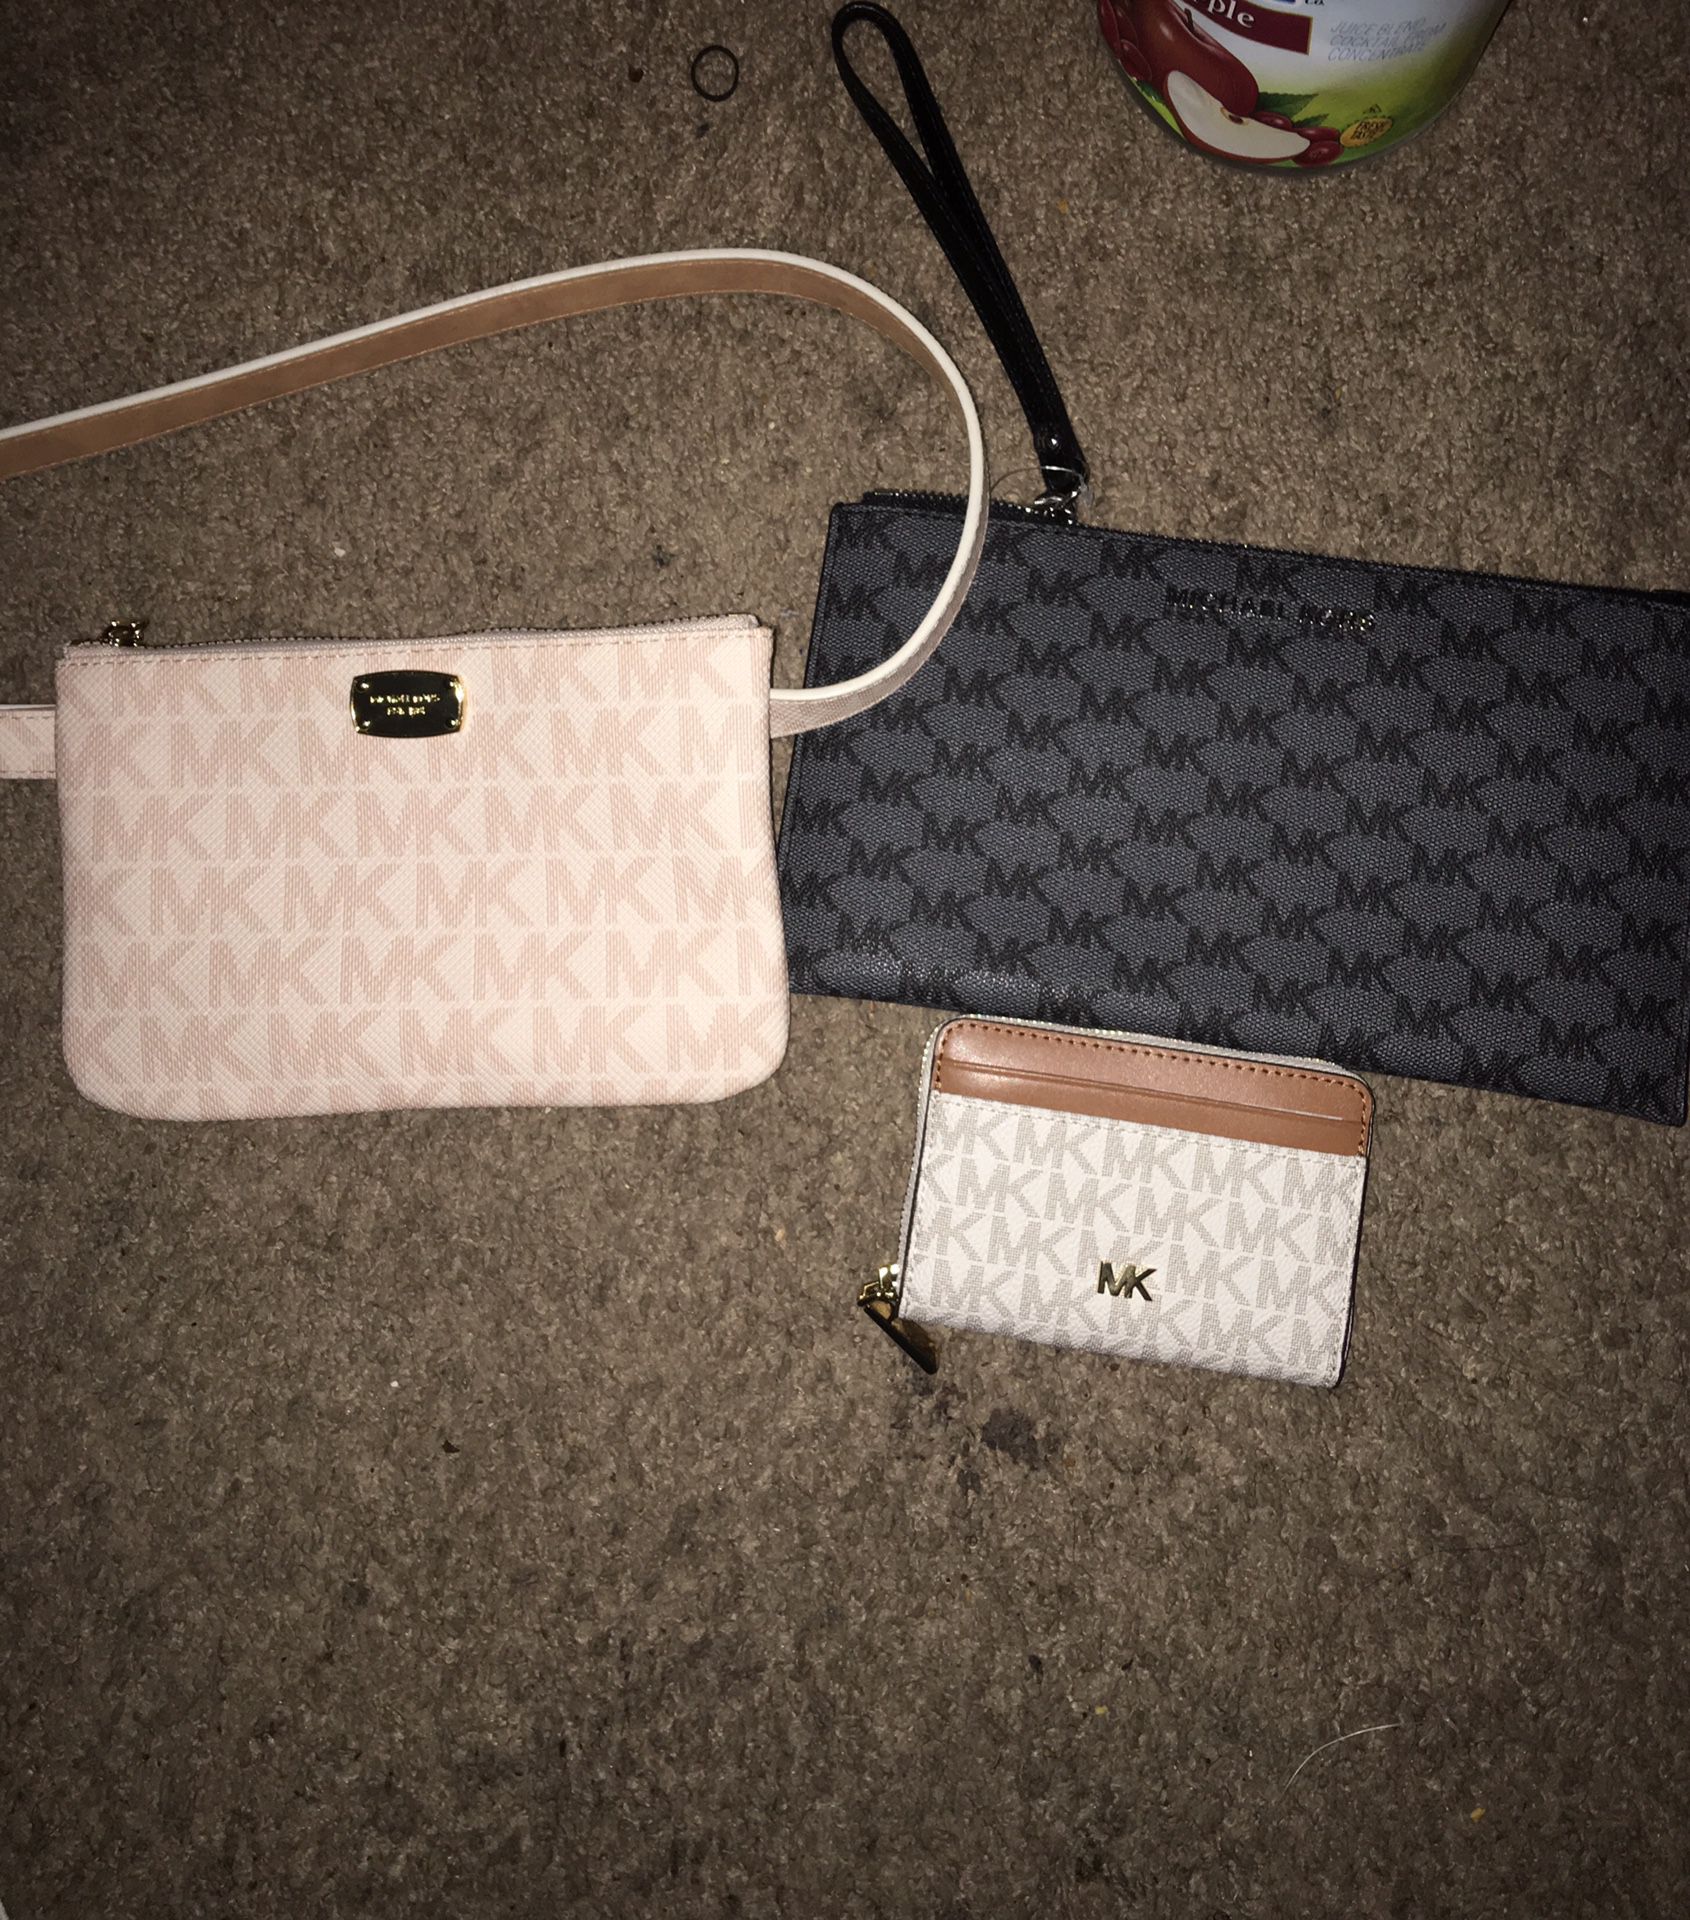 Michael kors wallets and fanny pack bag